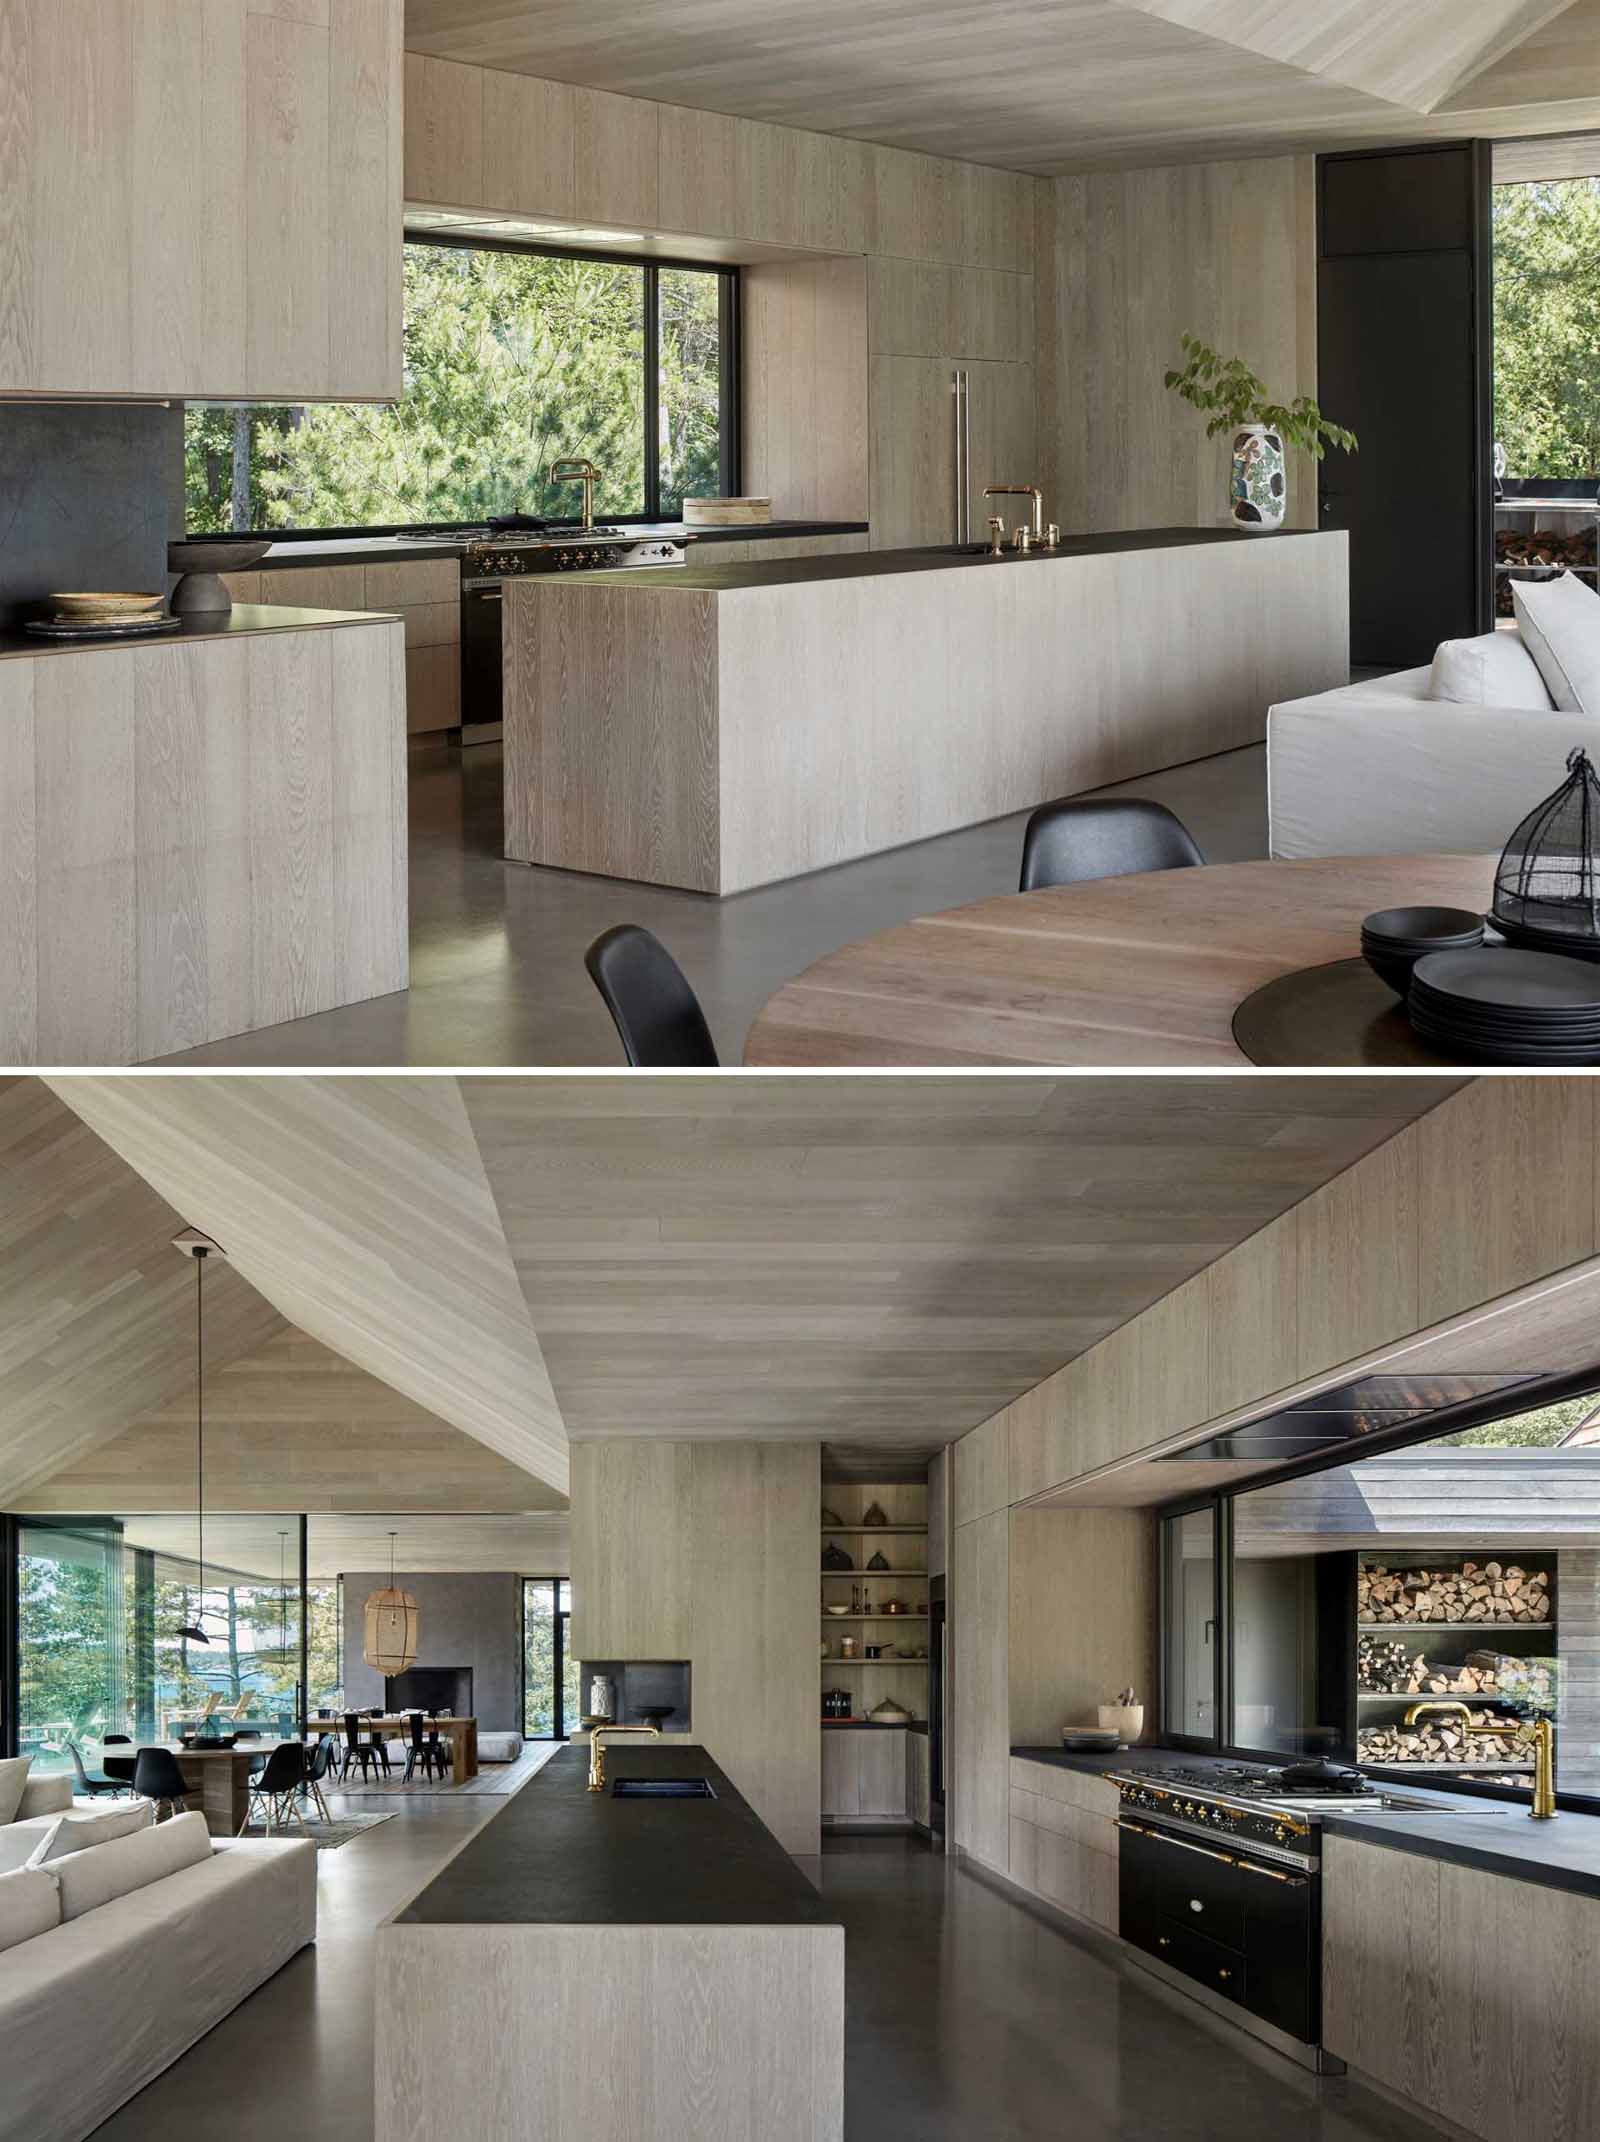 Modern kitchen cabinetry made to blend into the Oak wall boards, runs flush with the island's granite countertop.